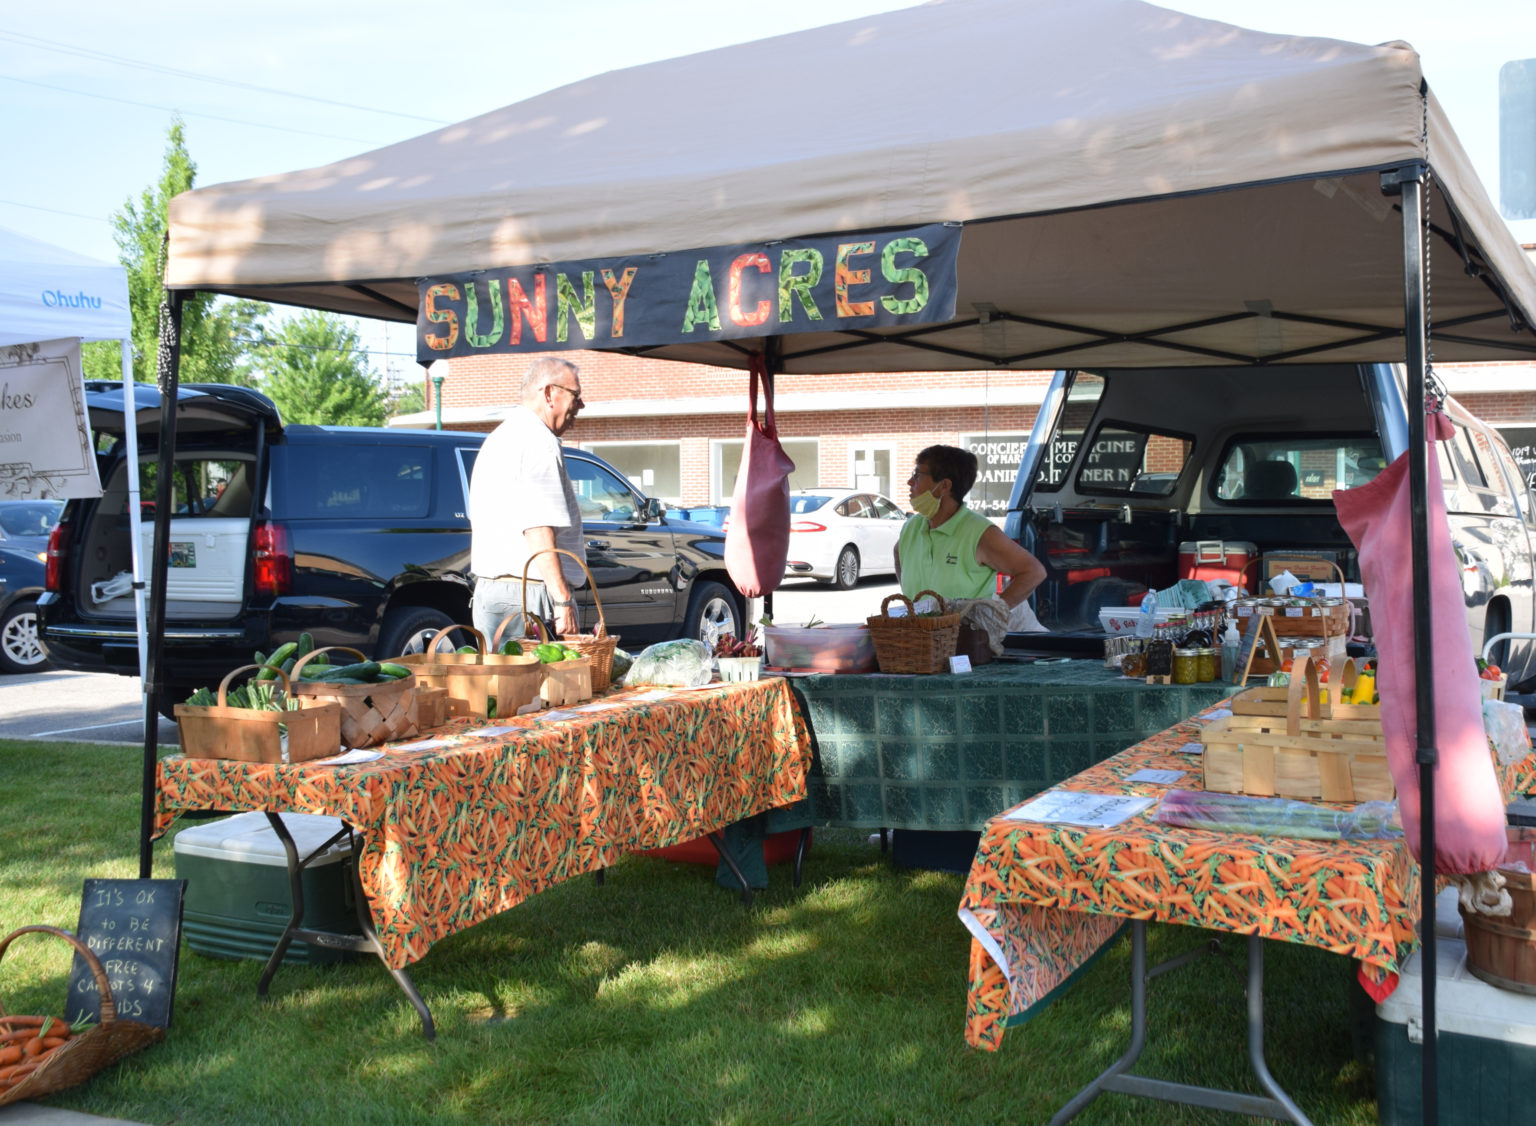 About Plymouth Farmer's Market in River Park Square